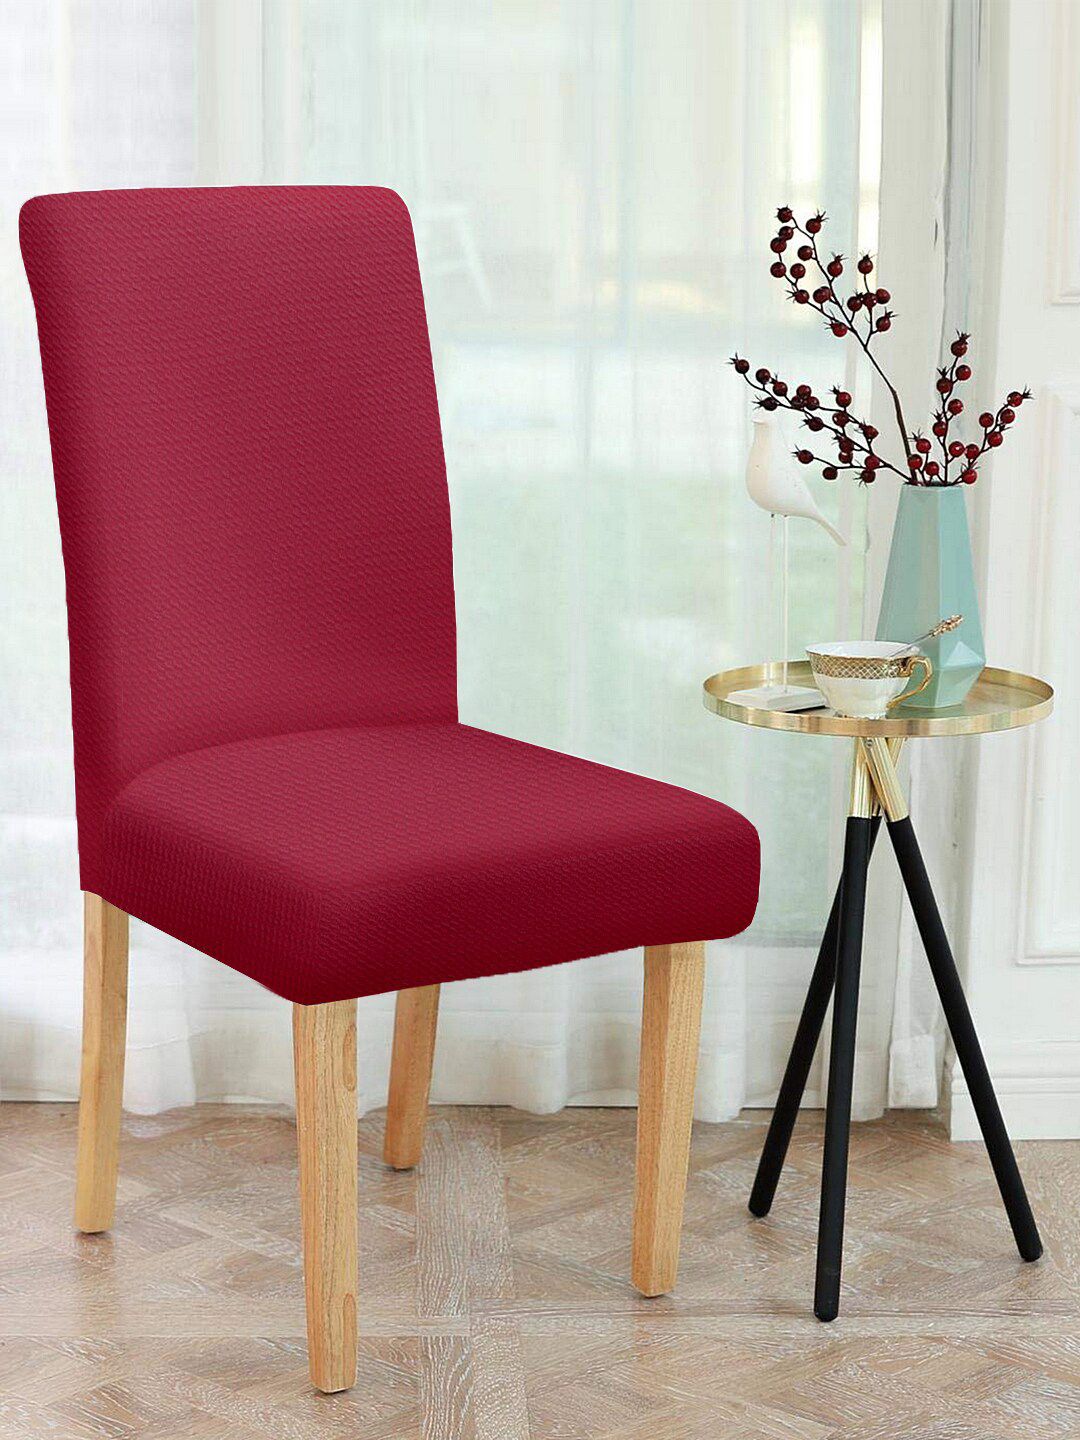 Cortina Set Of 6 Maroon Self Design Chair Covers Price in India